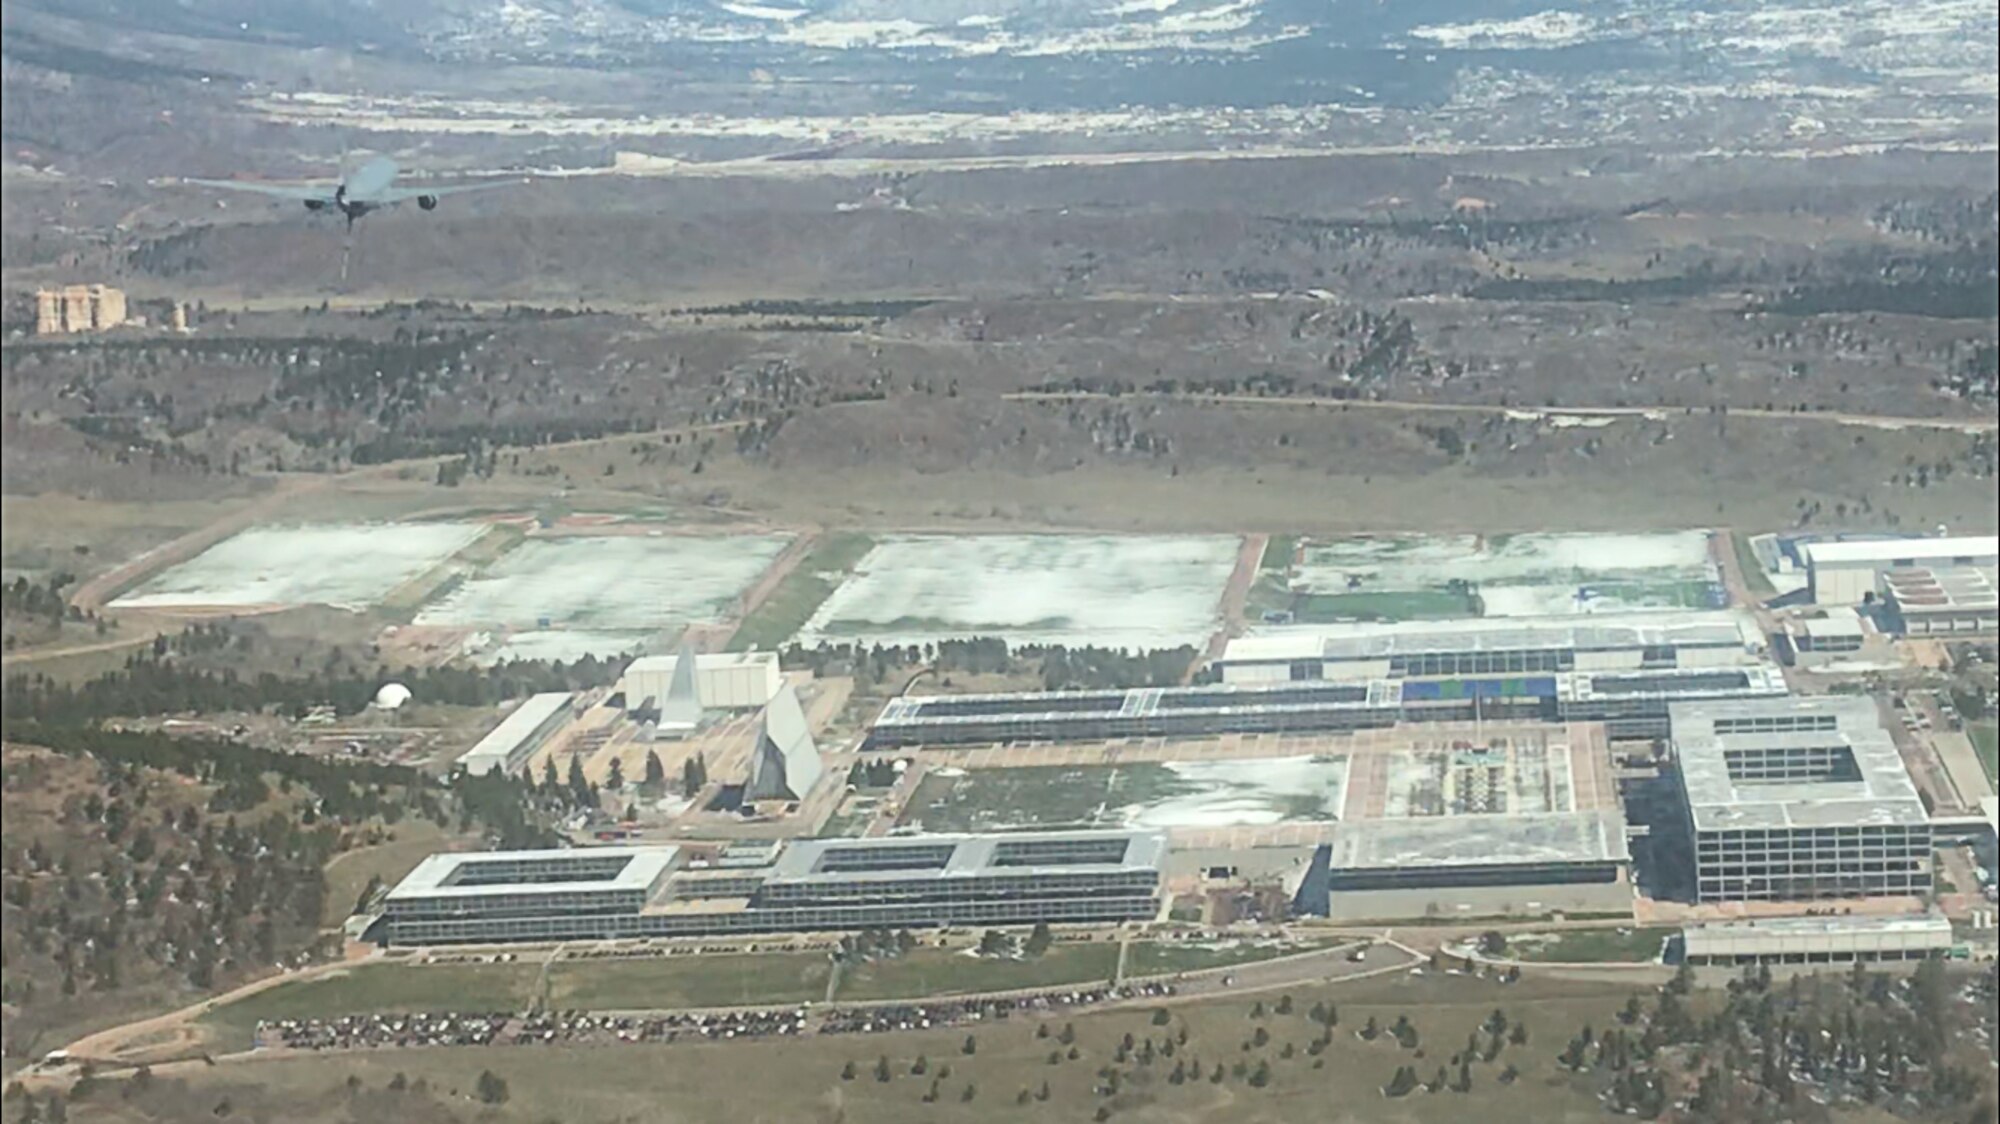 A KC-46 Pegasus, assigned to the 56th Air Refueling Squadron at Altus Air Force Base, Oklahoma, flies over the United States Air Force Academy in Colorado Springs, Colorado, April 17, 2020.